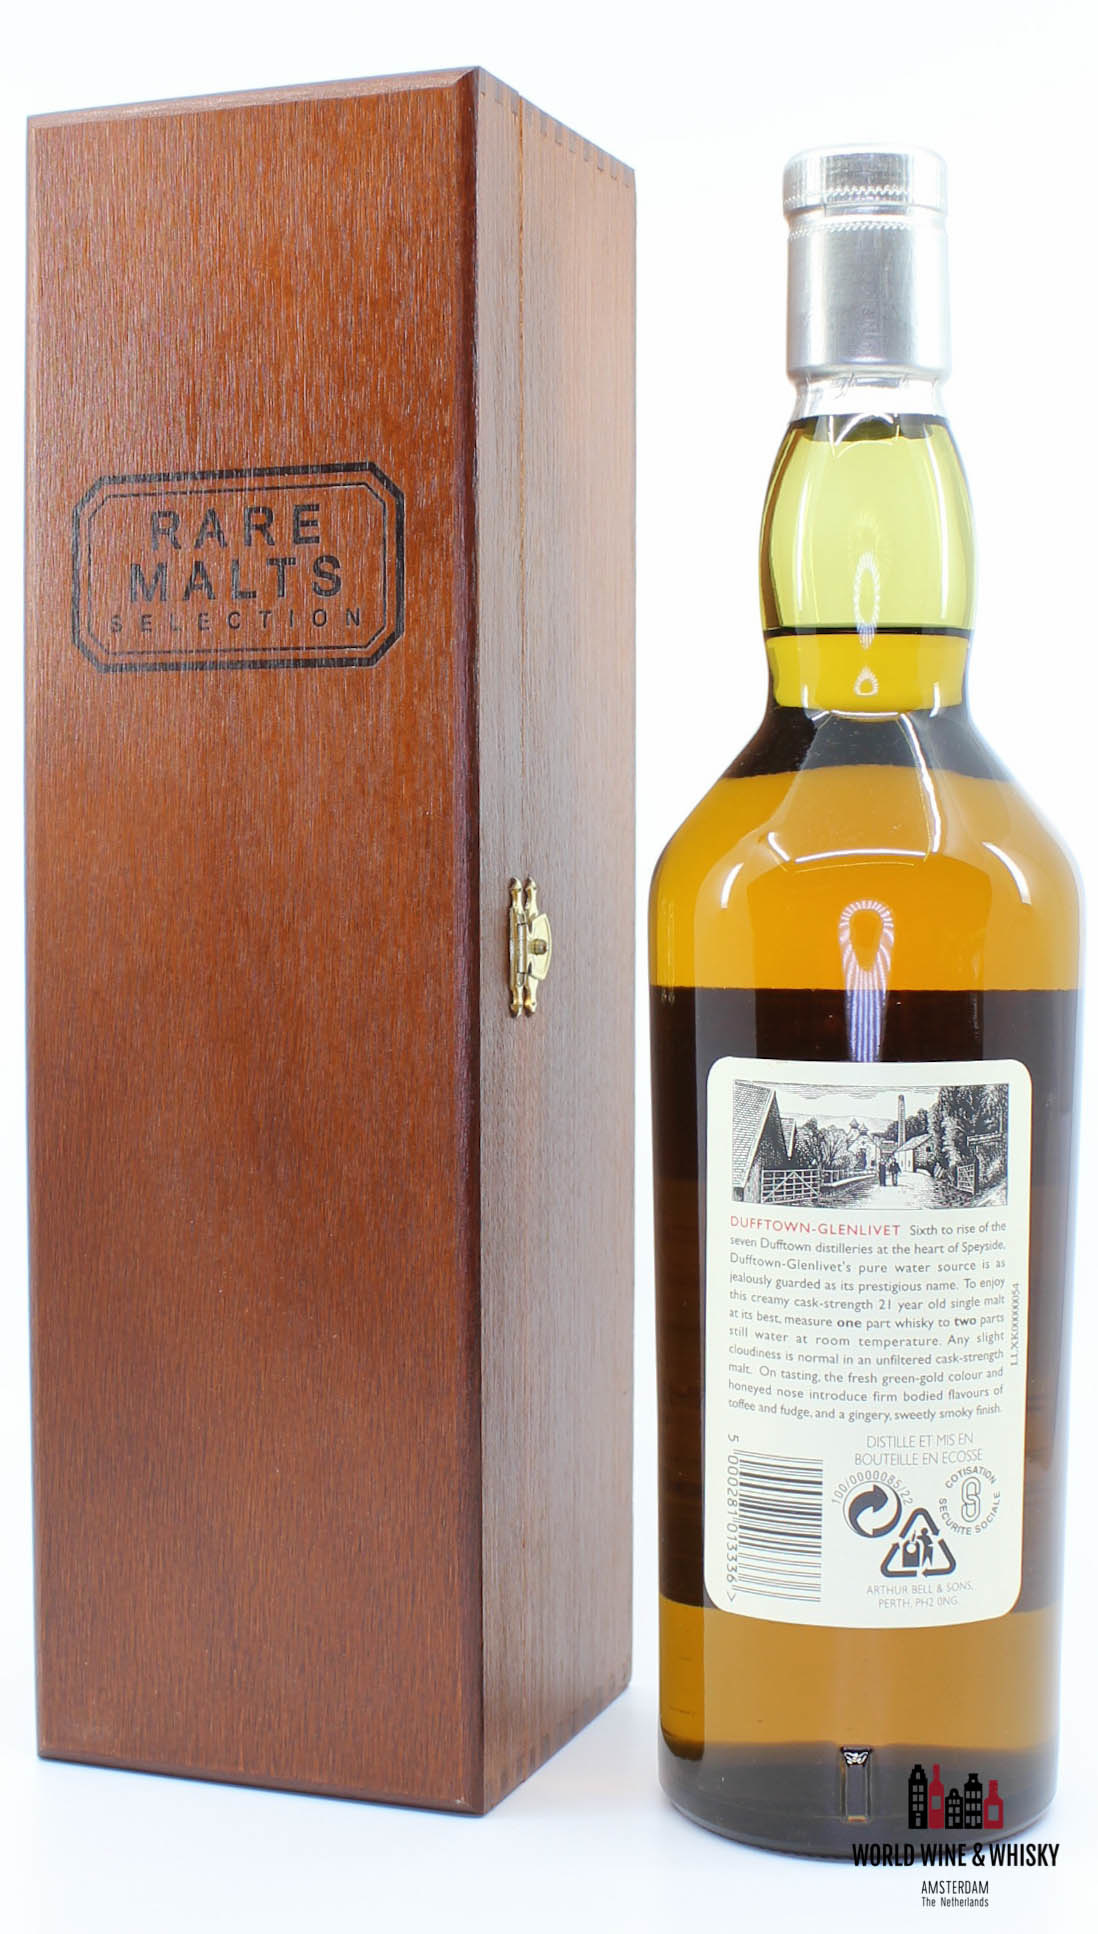 Dufftown Dufftown-Glenlivet 21 Years Old 1975 1997 Rare Malts Selection 54.8% (in wooden box)